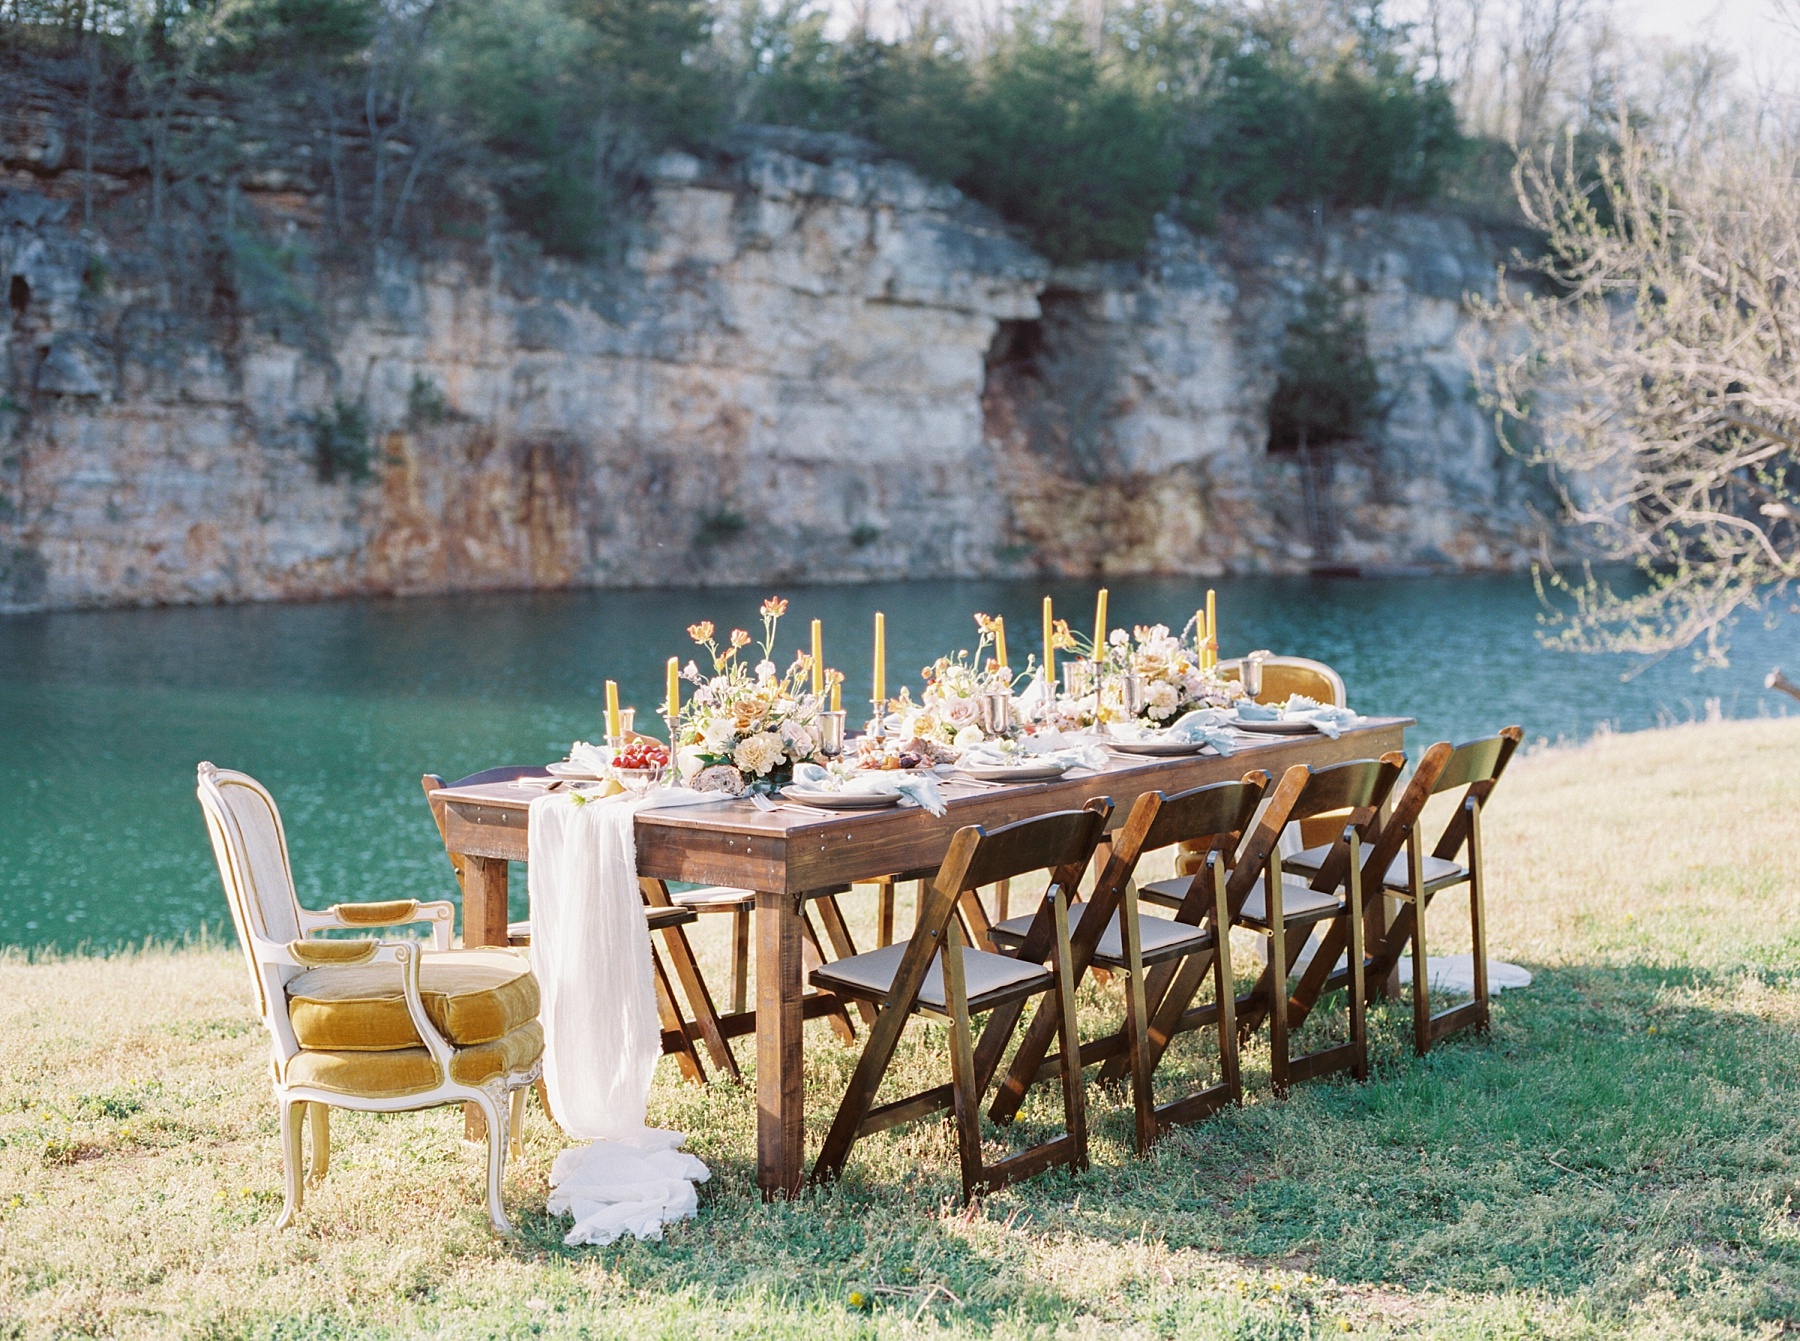 Intimate Spanish and French Inspired Destination Wedding with Lakeside Dinner Party at Dusk at Wildcliff by Kelsi Kliethermes Photography Best Missouri and Maui Wedding Photographer_0009.jpg